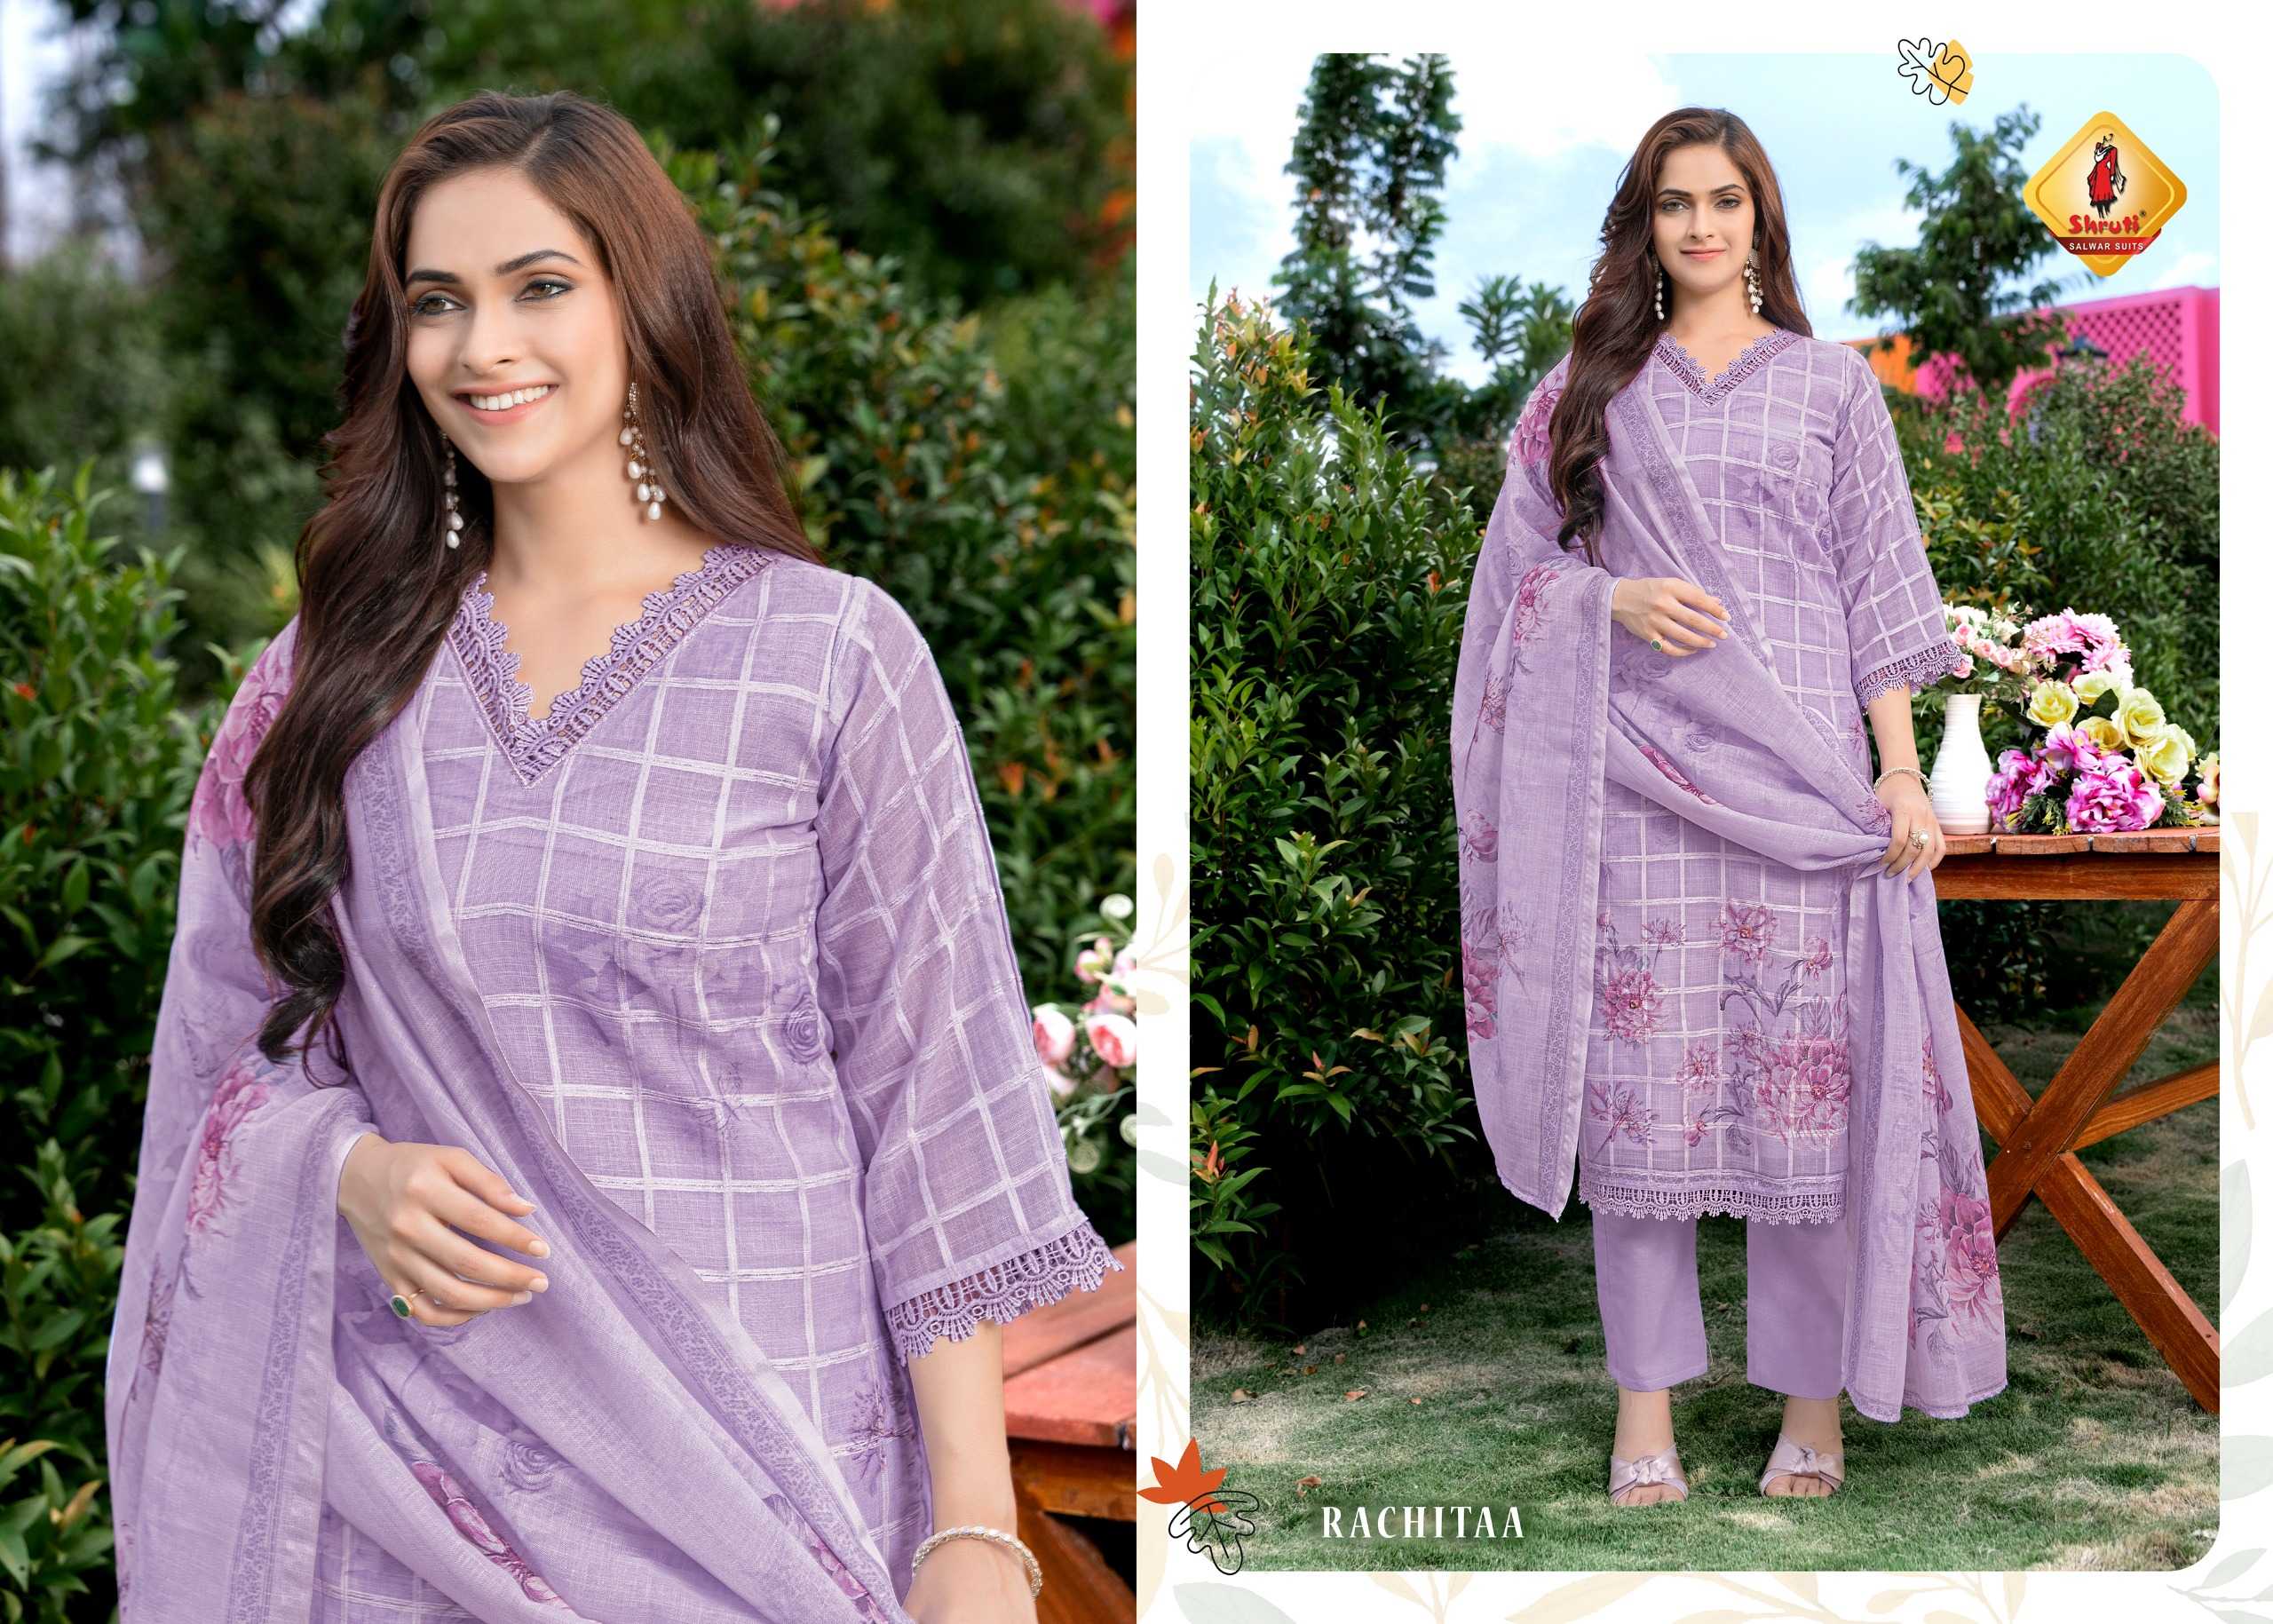 SHRUTI SUIT SHADES OF SUMMER FULLY STITCH PRETTY LOOK SALWAR SUIT